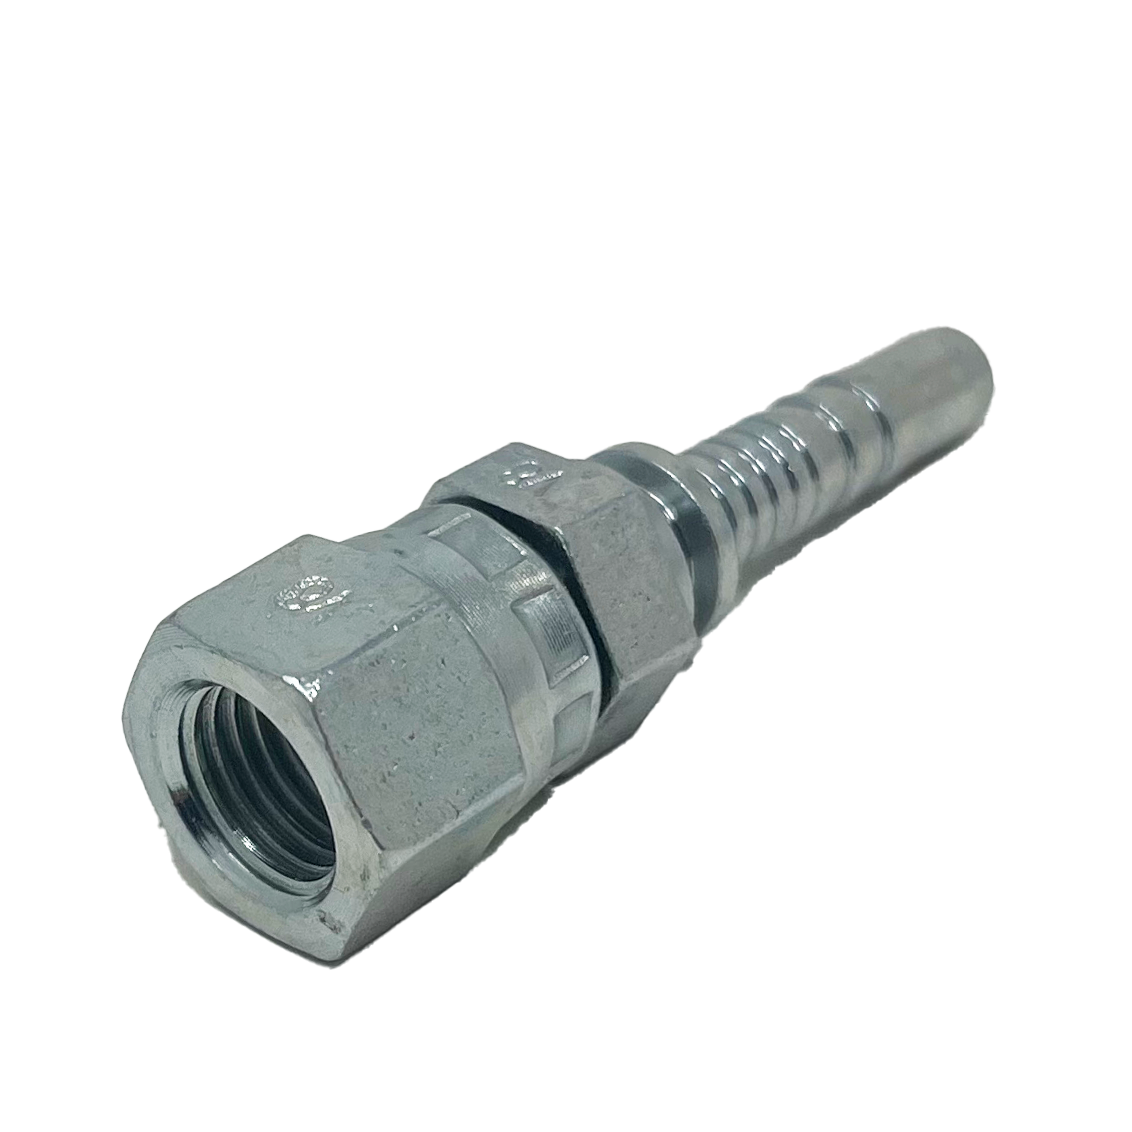 UC-JCFX-0404 : Continental Hose Fitting, 0.25 (1/4") Hose ID, 7/16-20 Female JIC, Straight, Swivel Connection